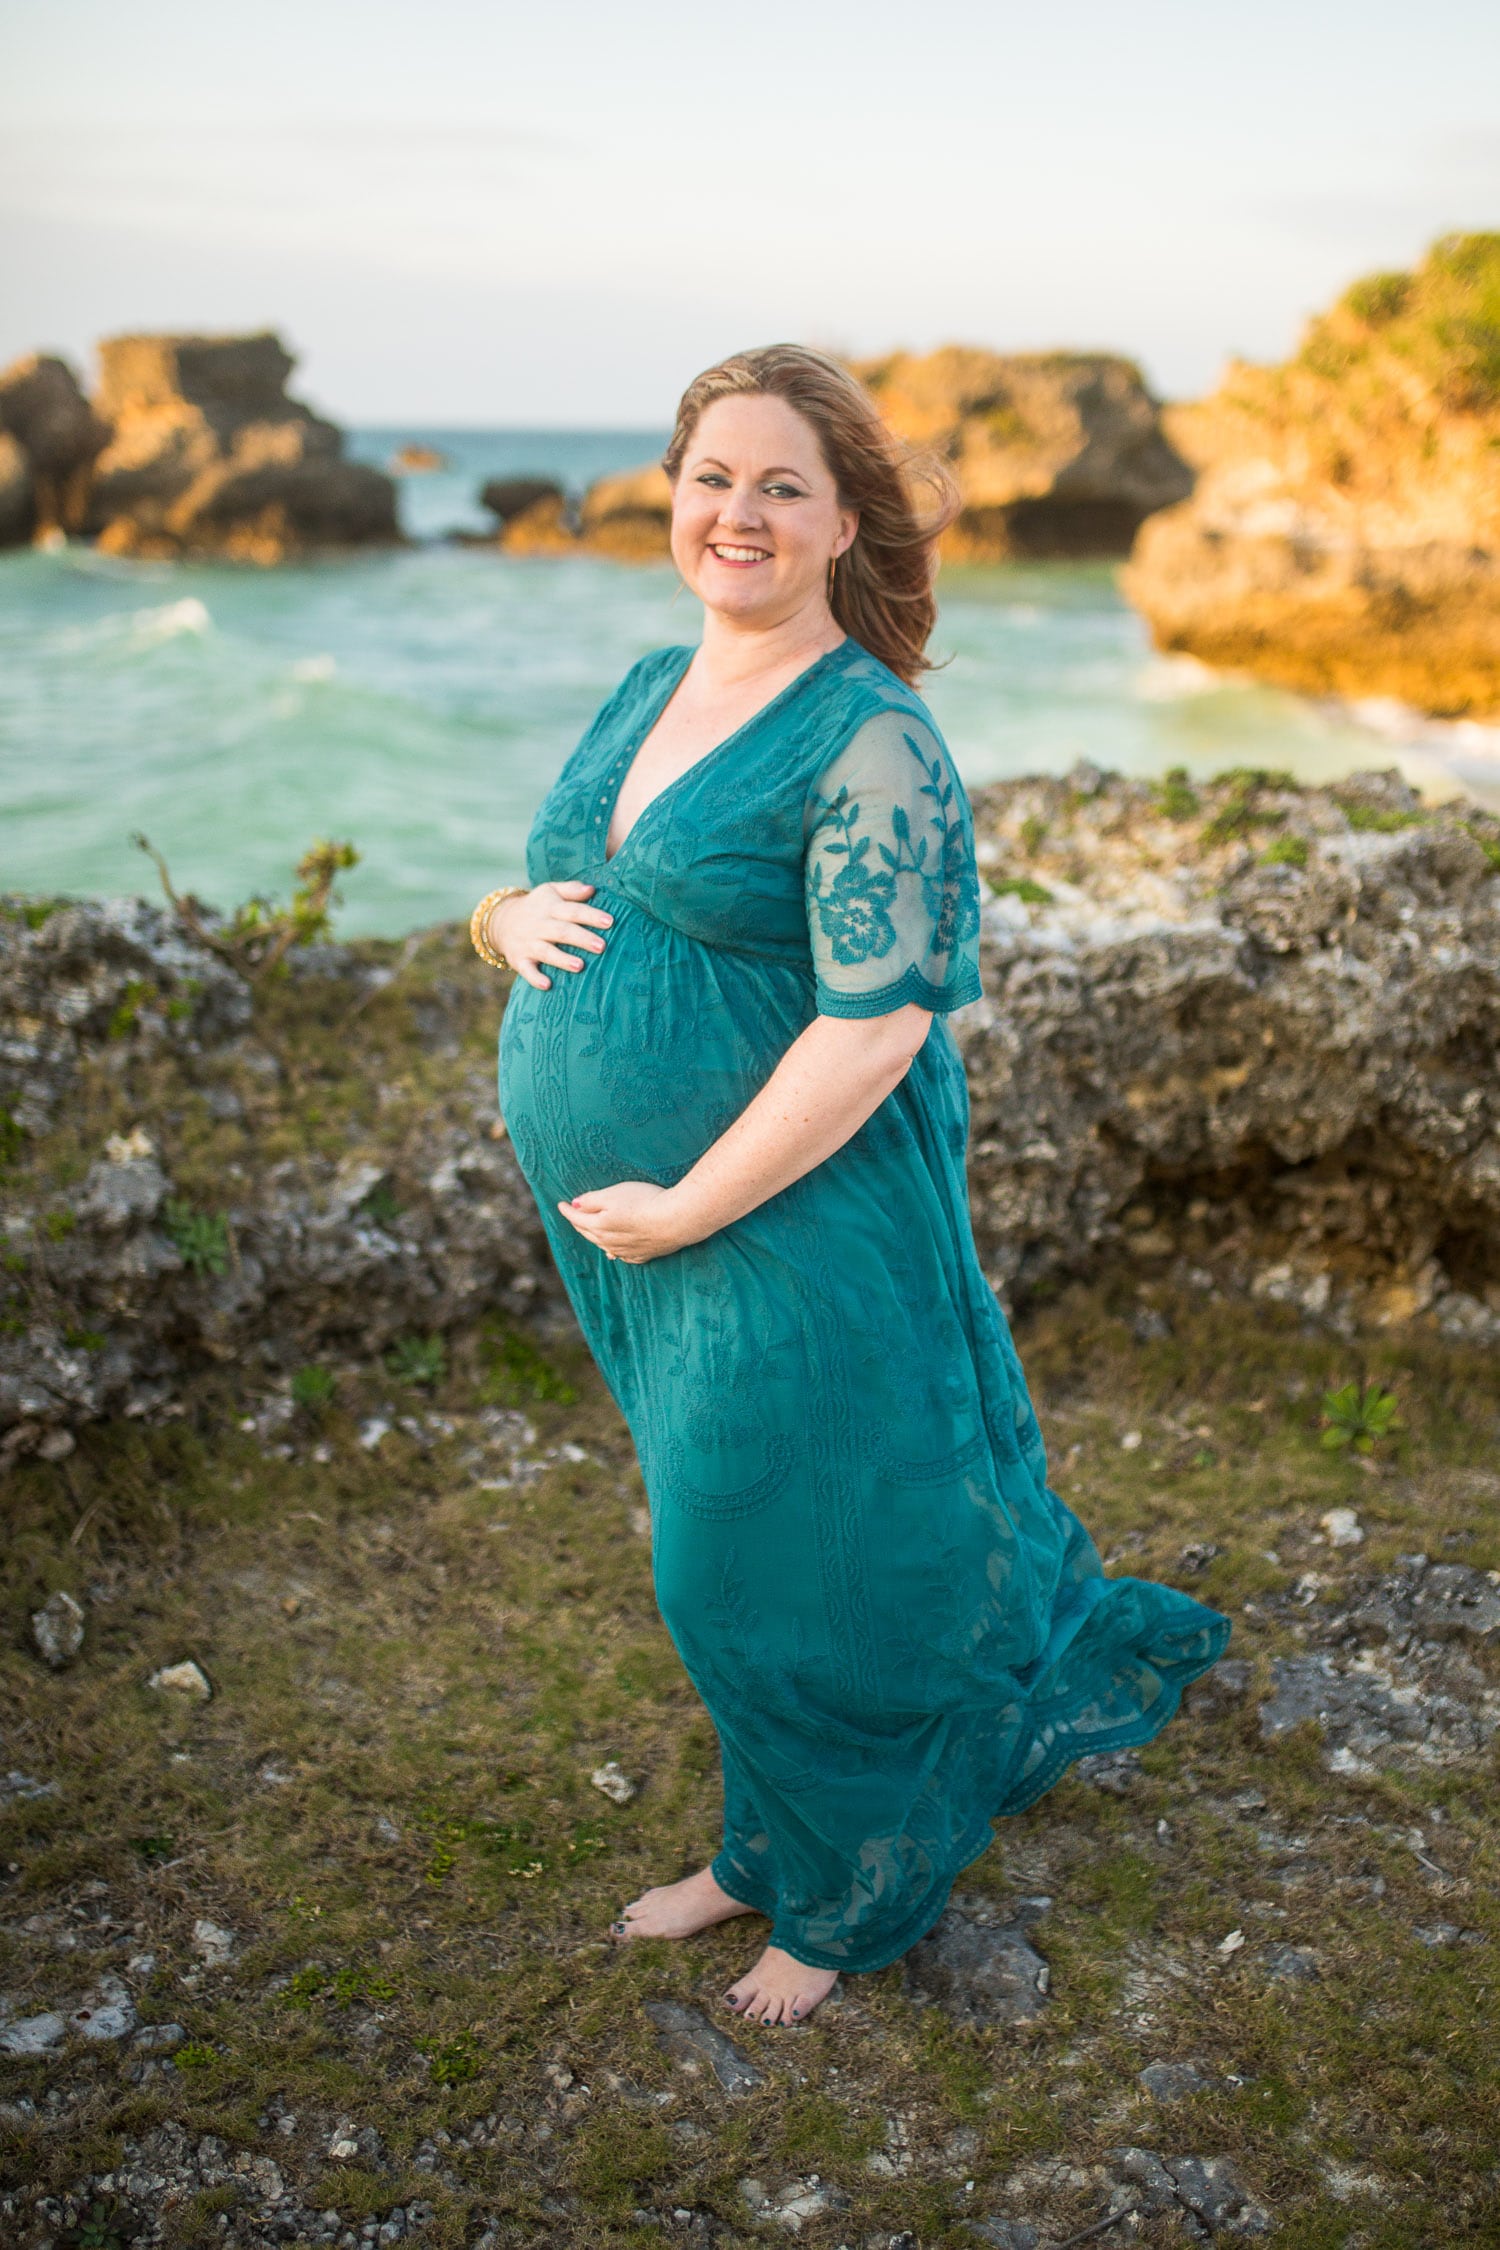 Maternity pregnancy photos on the beach in Okinawa Japan by Alison Bell Photographer.